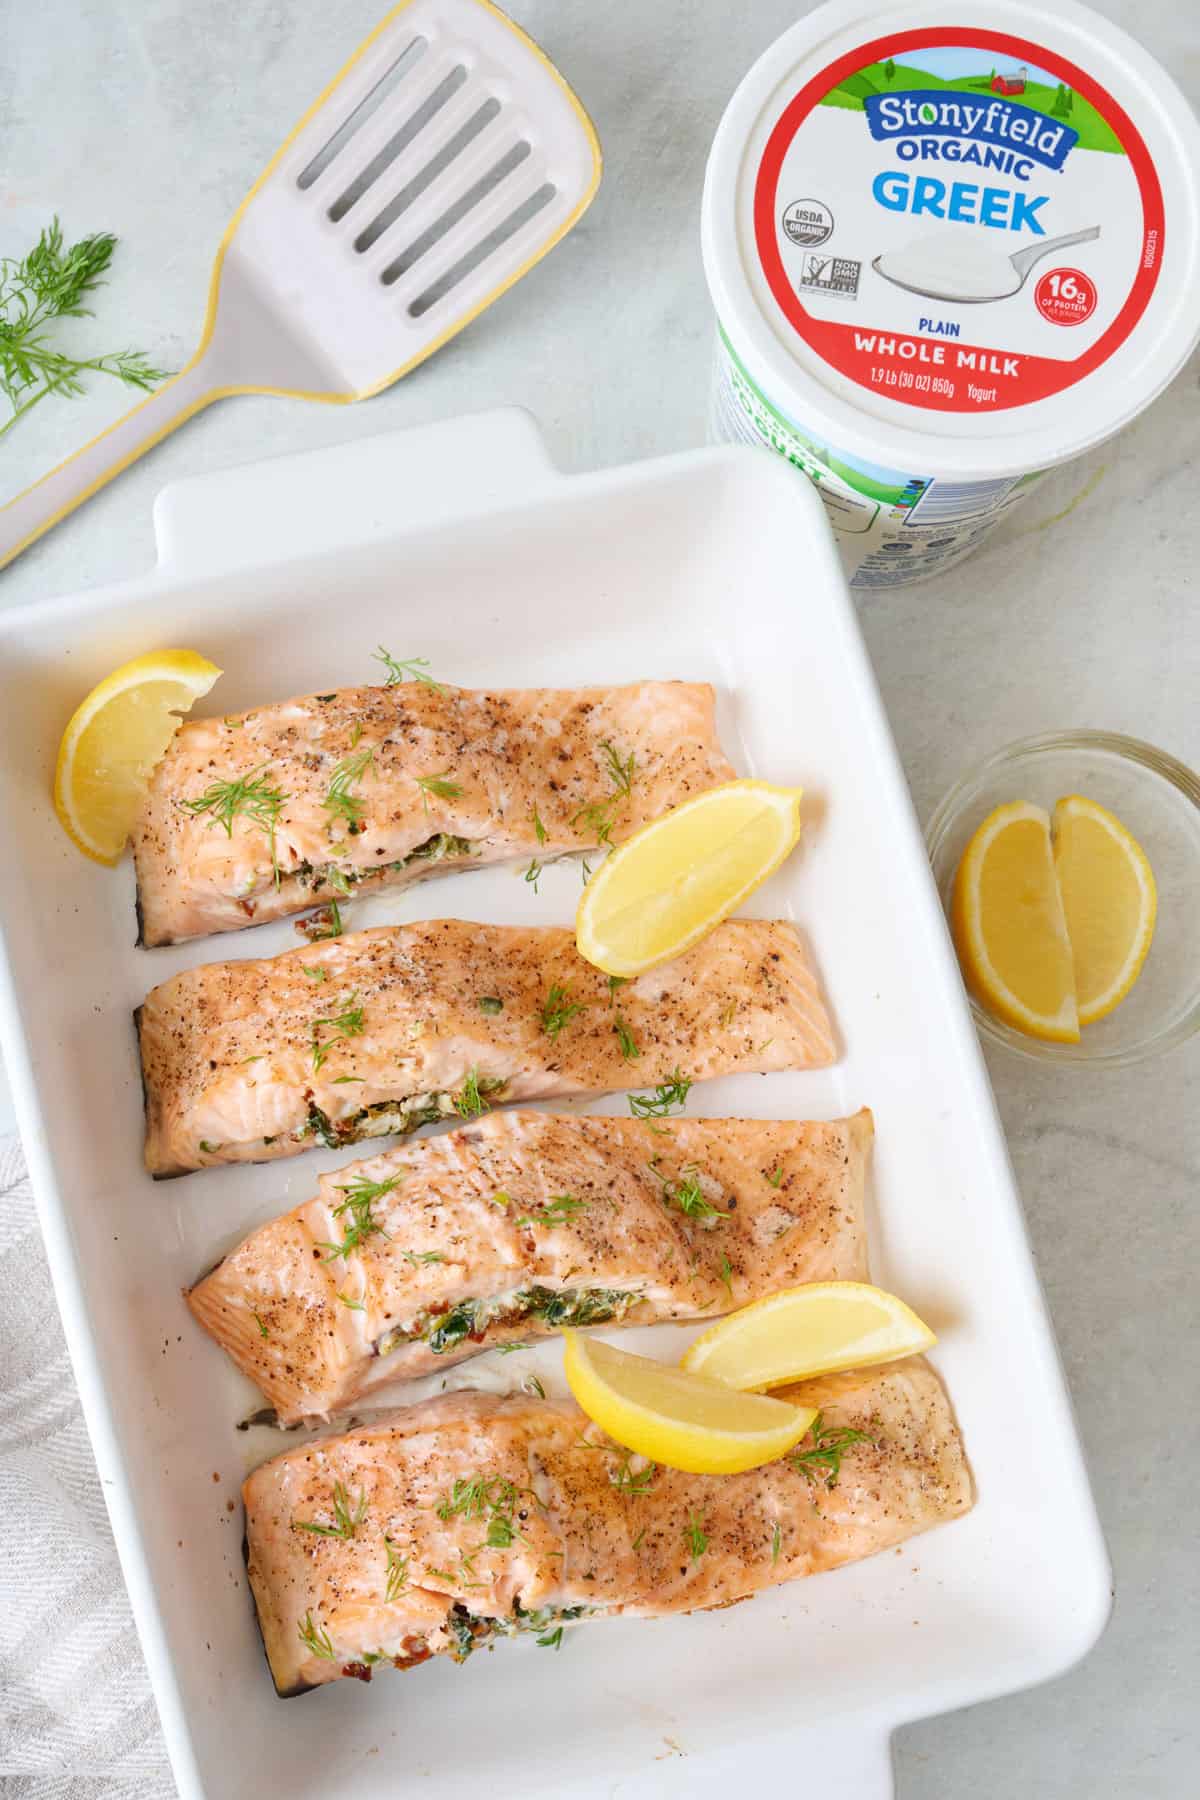 Baked stuffed salmon fillets in a white baking dish with lemon slices with a spatula and a carton of Stonyfield yogurt nearby.